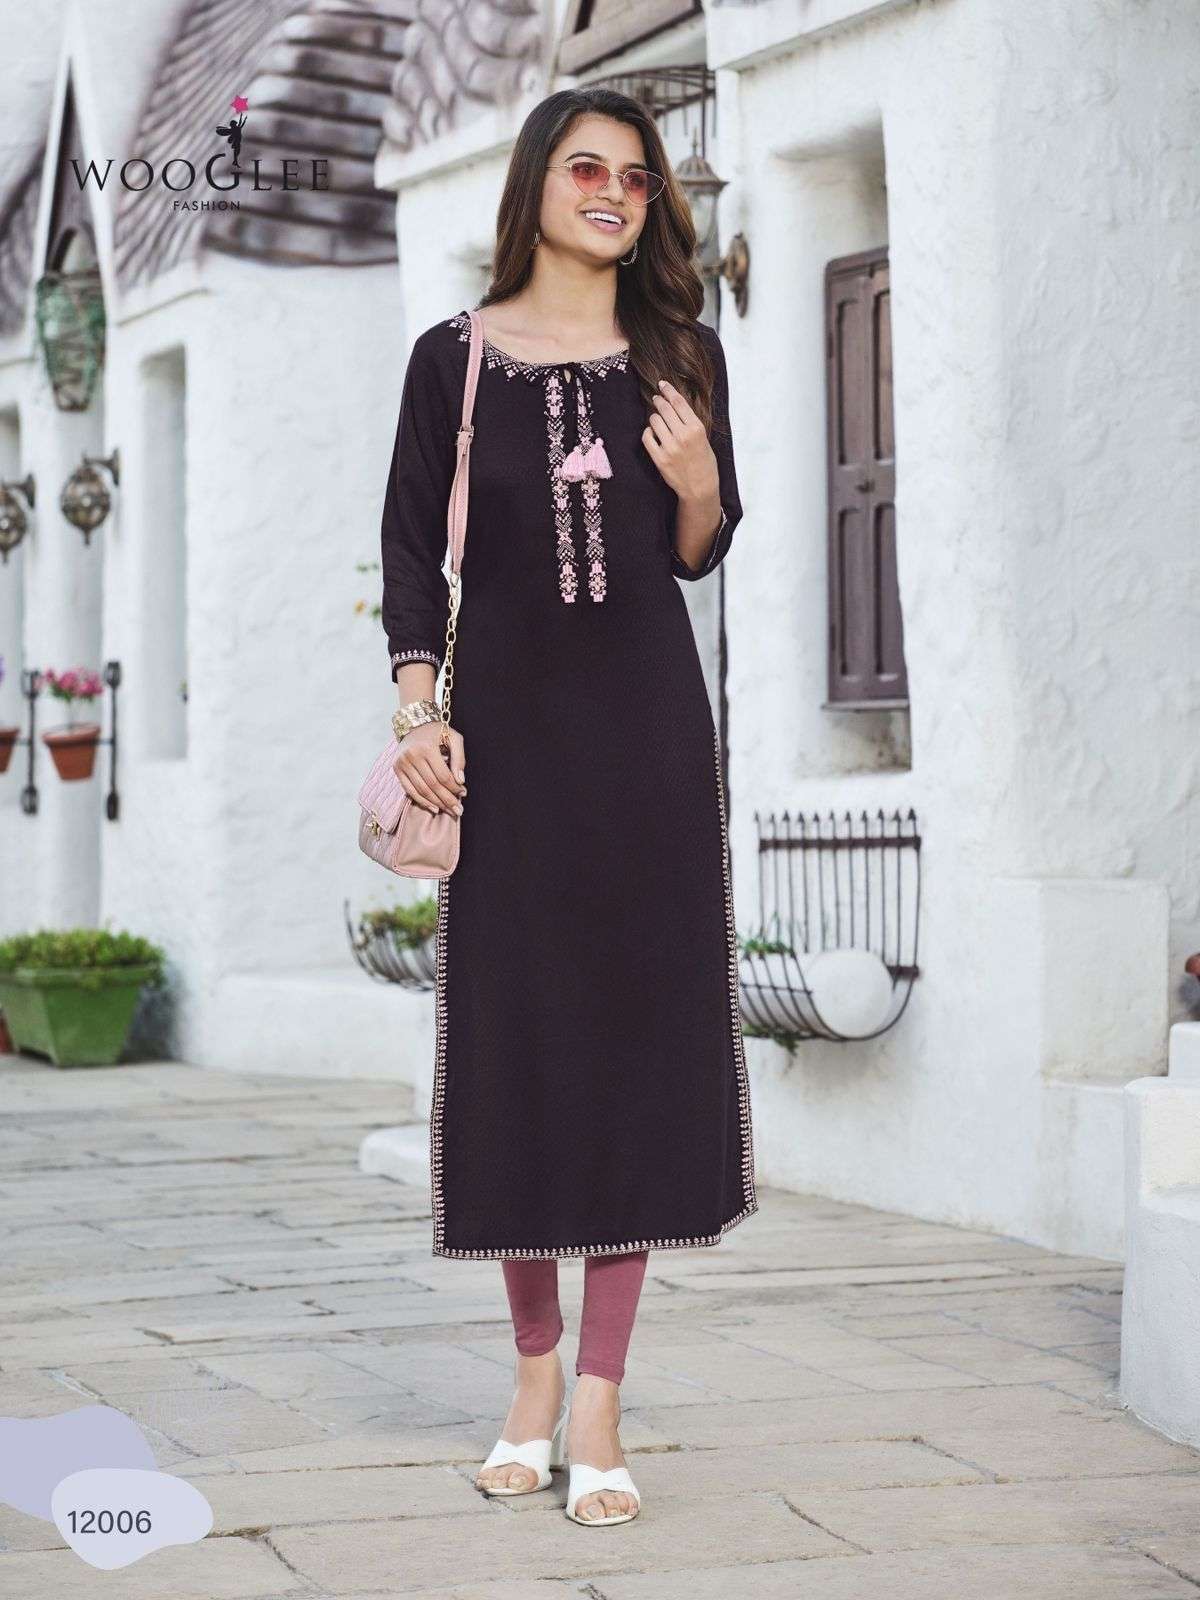 Cotton fancy kurti Manufacturers in Ahmedabad,Cotton fancy kurti Suppliers  Wholesaler Dealers